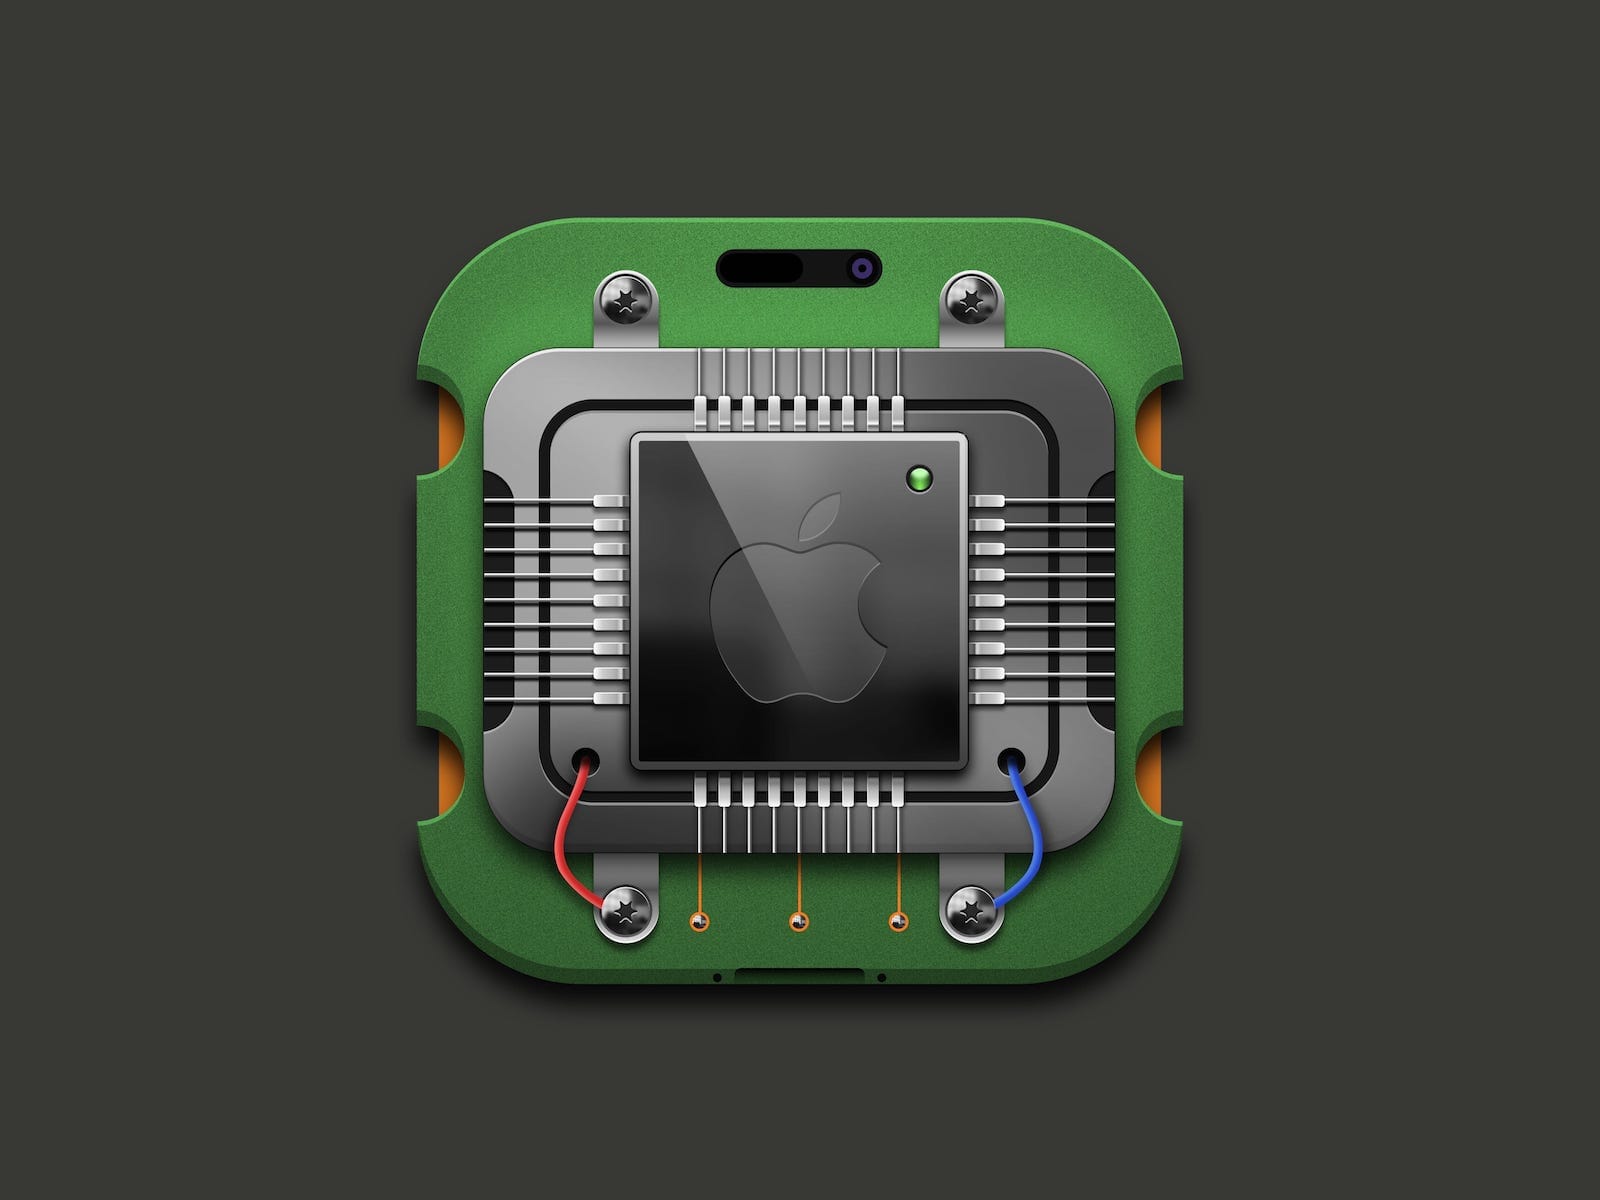 Circuit board icon resembling a piece of computer hardware.